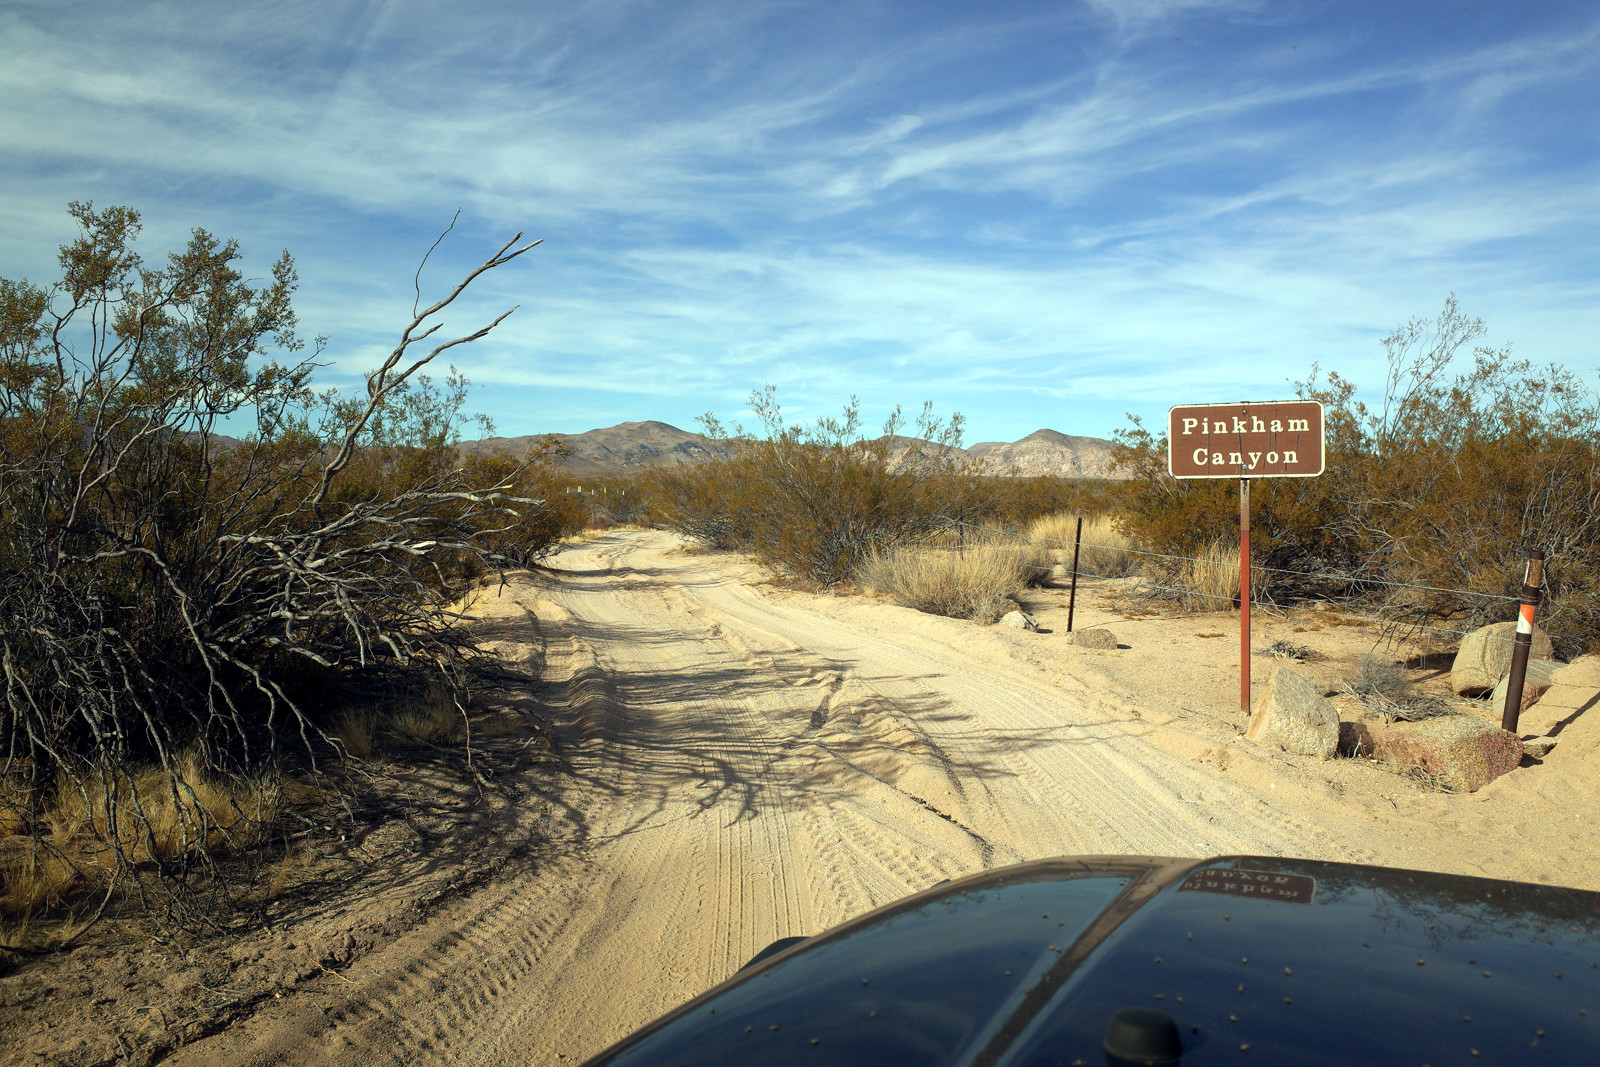 Sign at the beginning of Pinkham Canyon in Joshua Tree National Park